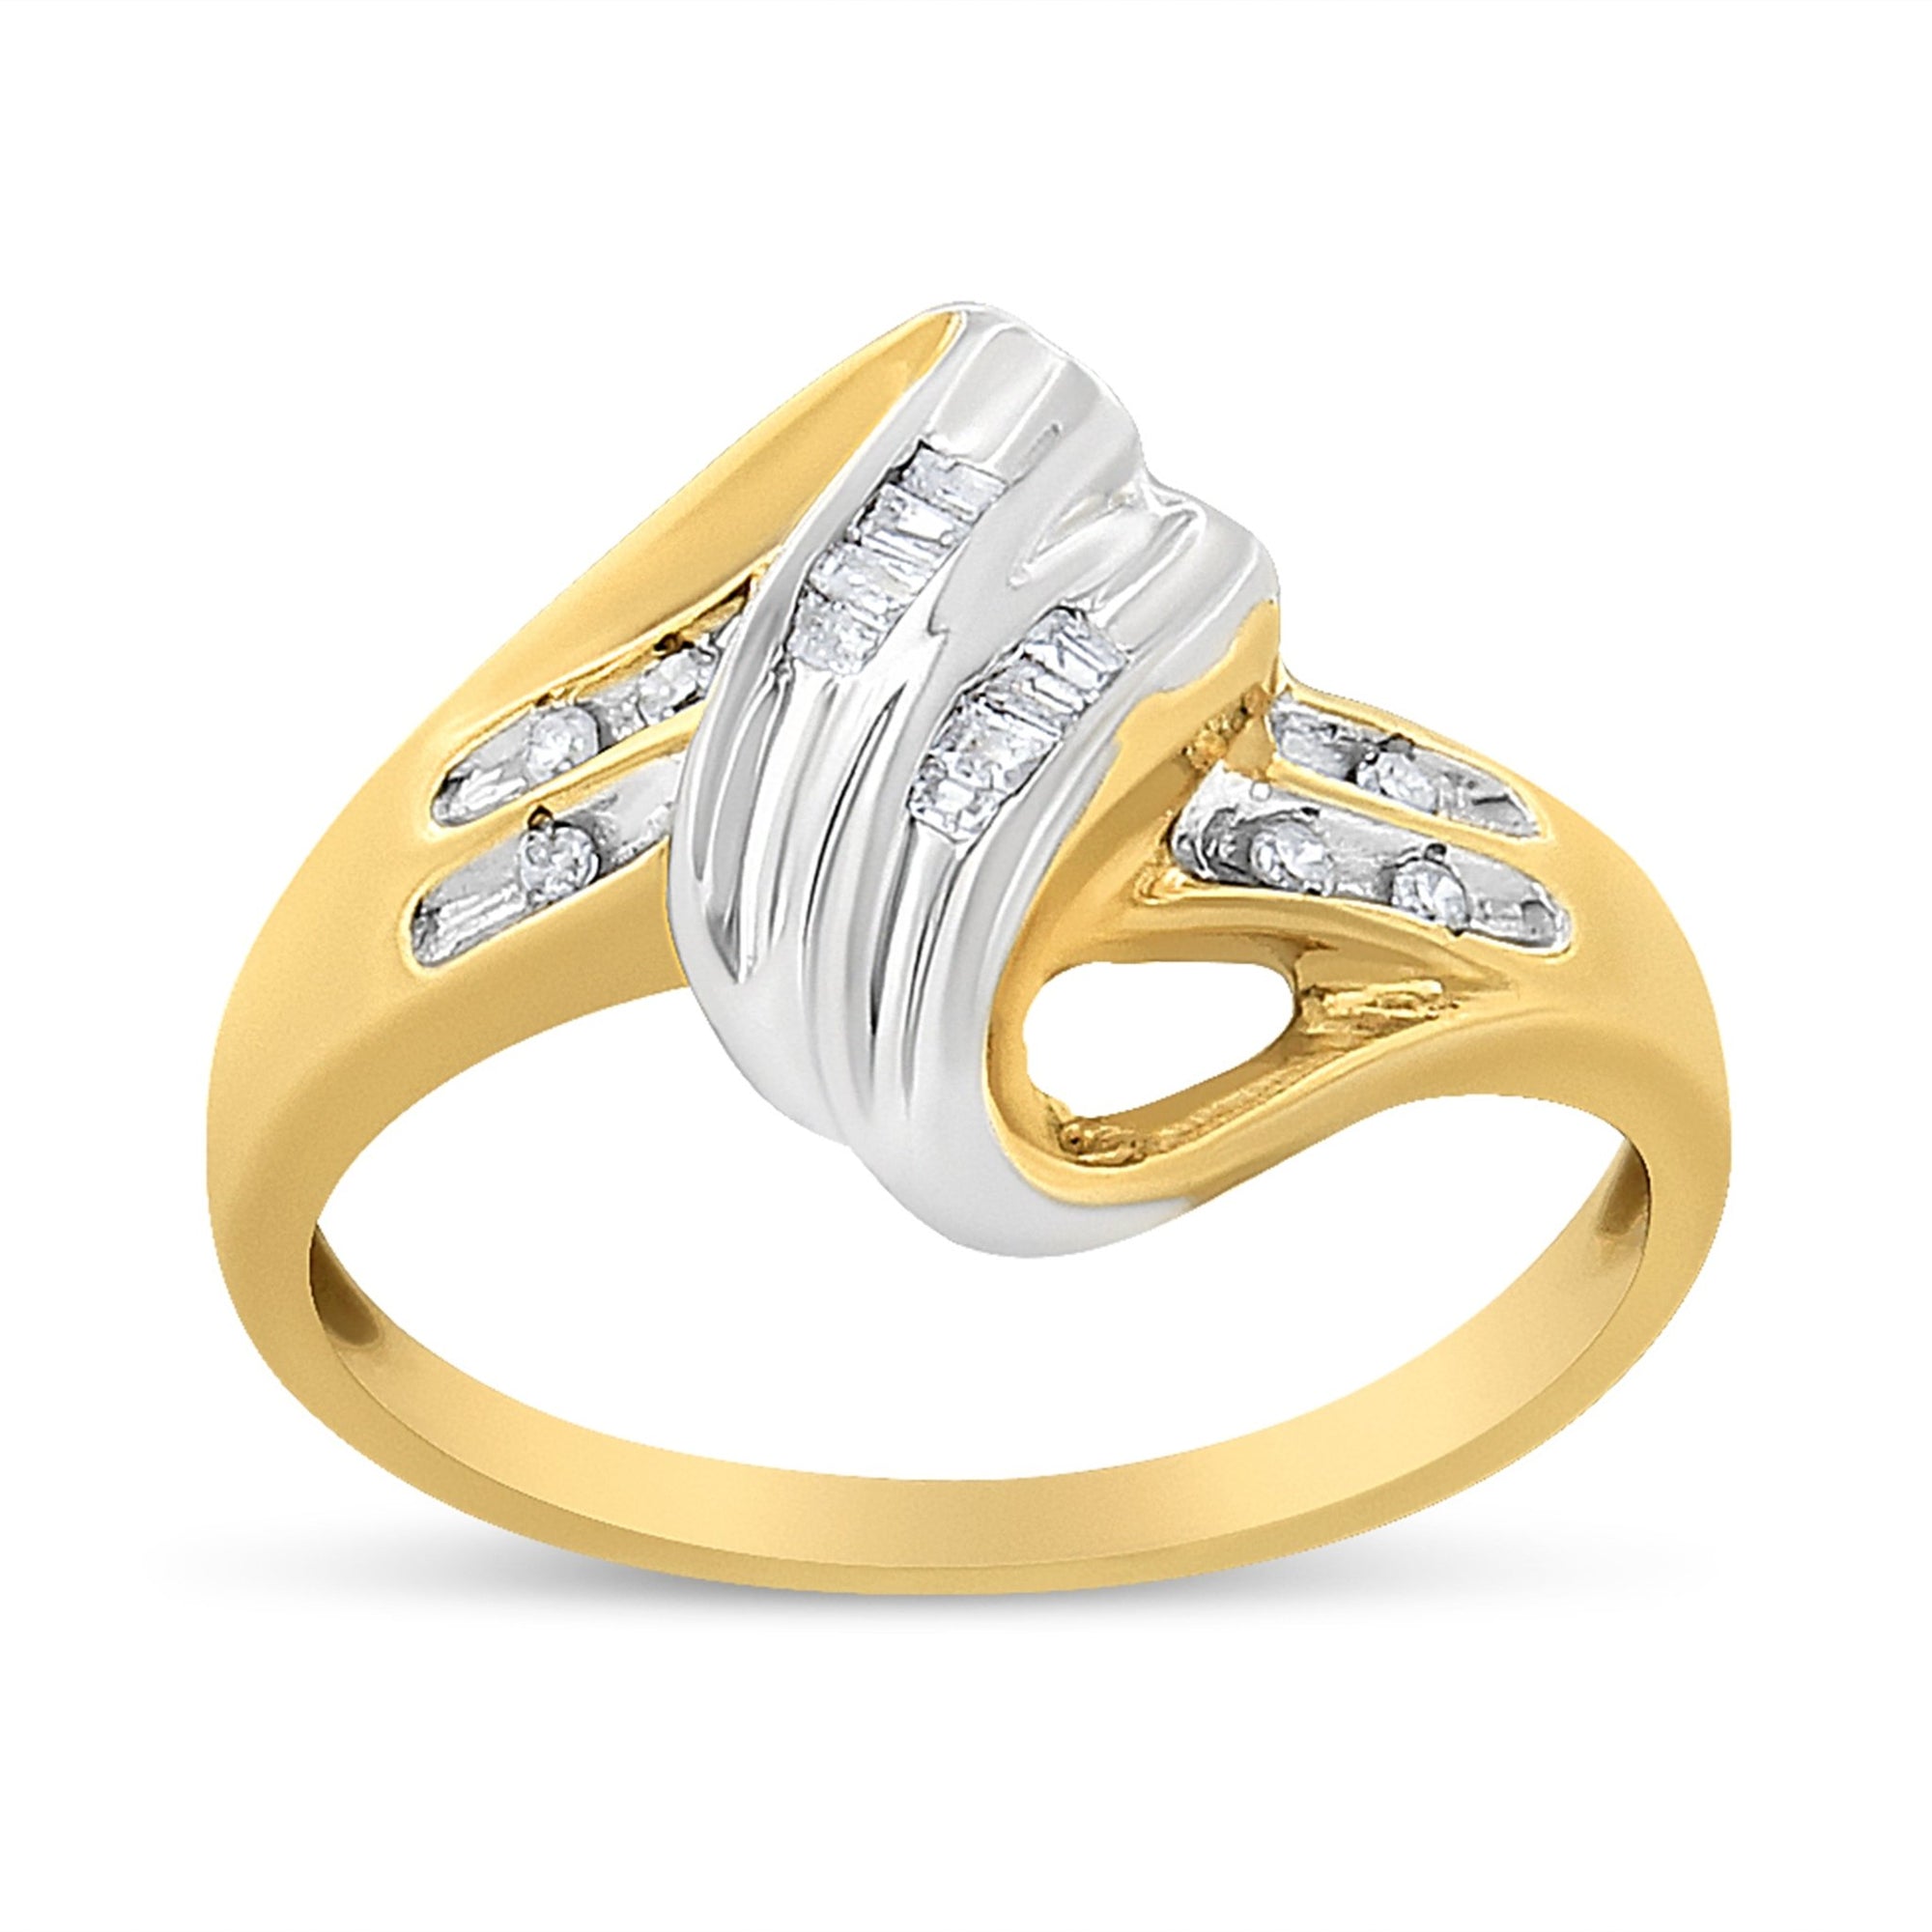 10K Yellow and White Gold 1.00 Cttw Round And Baguette-Cut Diamond Accent Bypass Ring (H-I Color, I2-I3 Clarity) - Ring Size 7 - LinkagejewelrydesignLinkagejewelrydesign